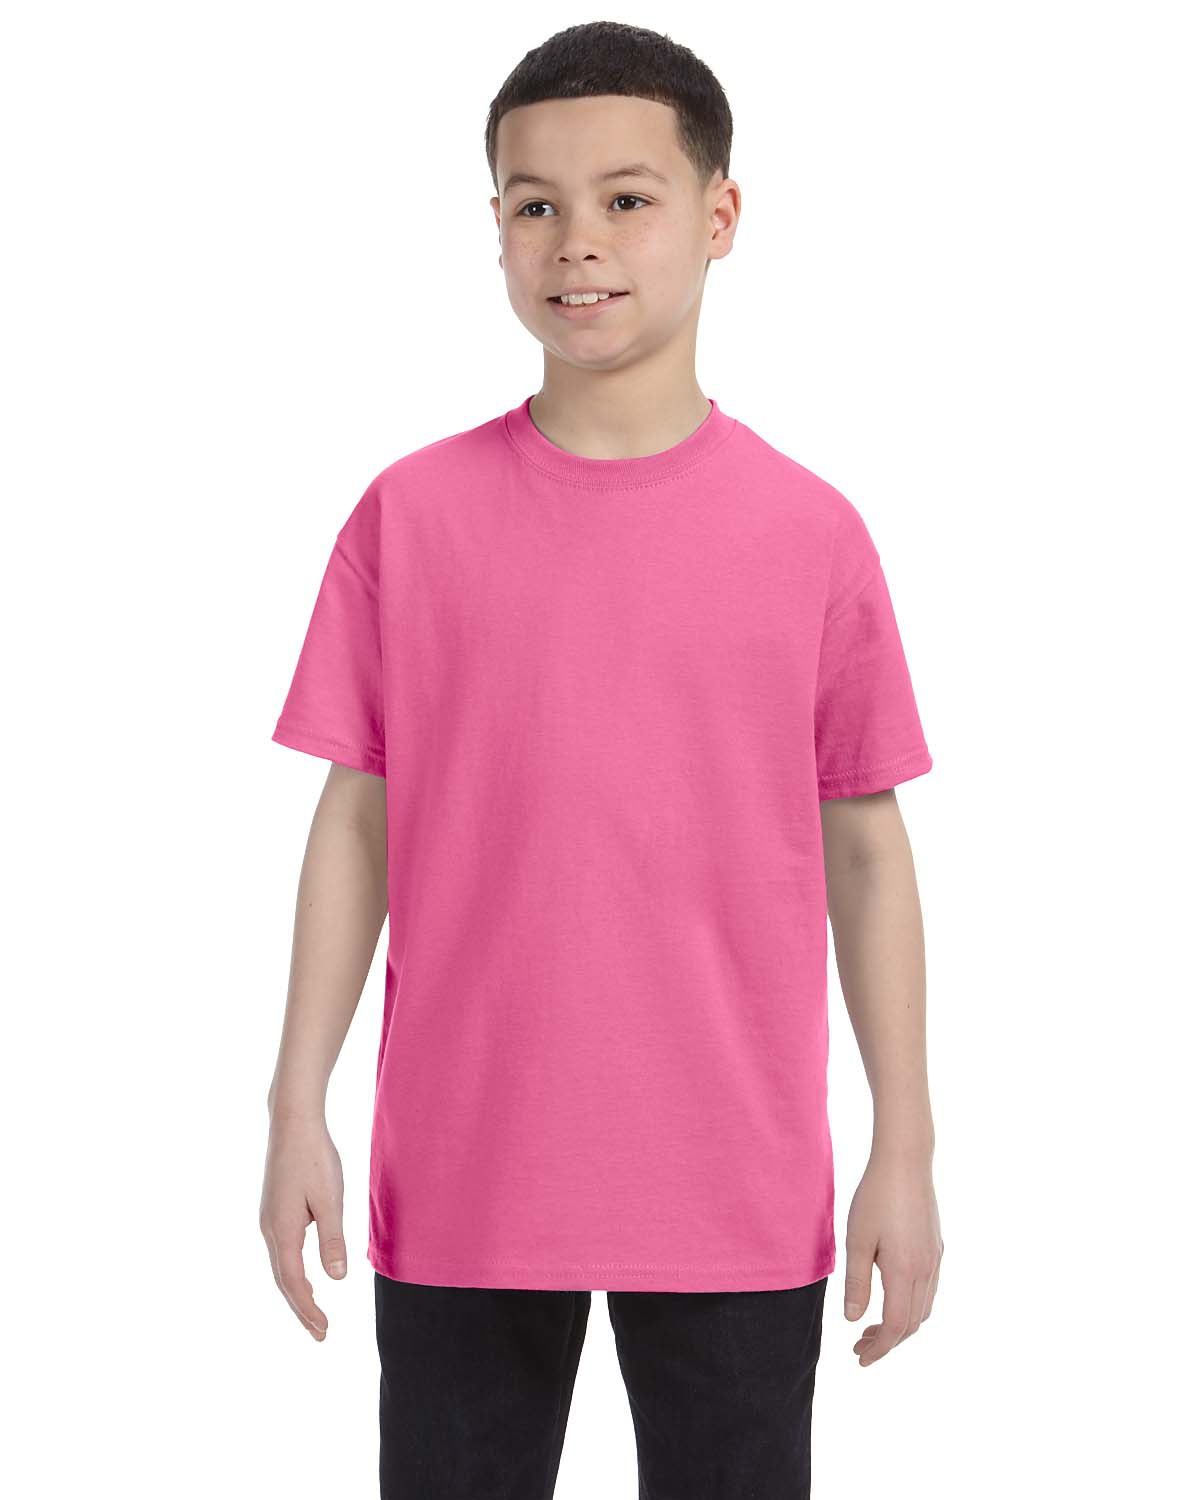 Adult Jerzees Brand 5.6oz 50/50 T-Shirt Color-Cyber Pink –